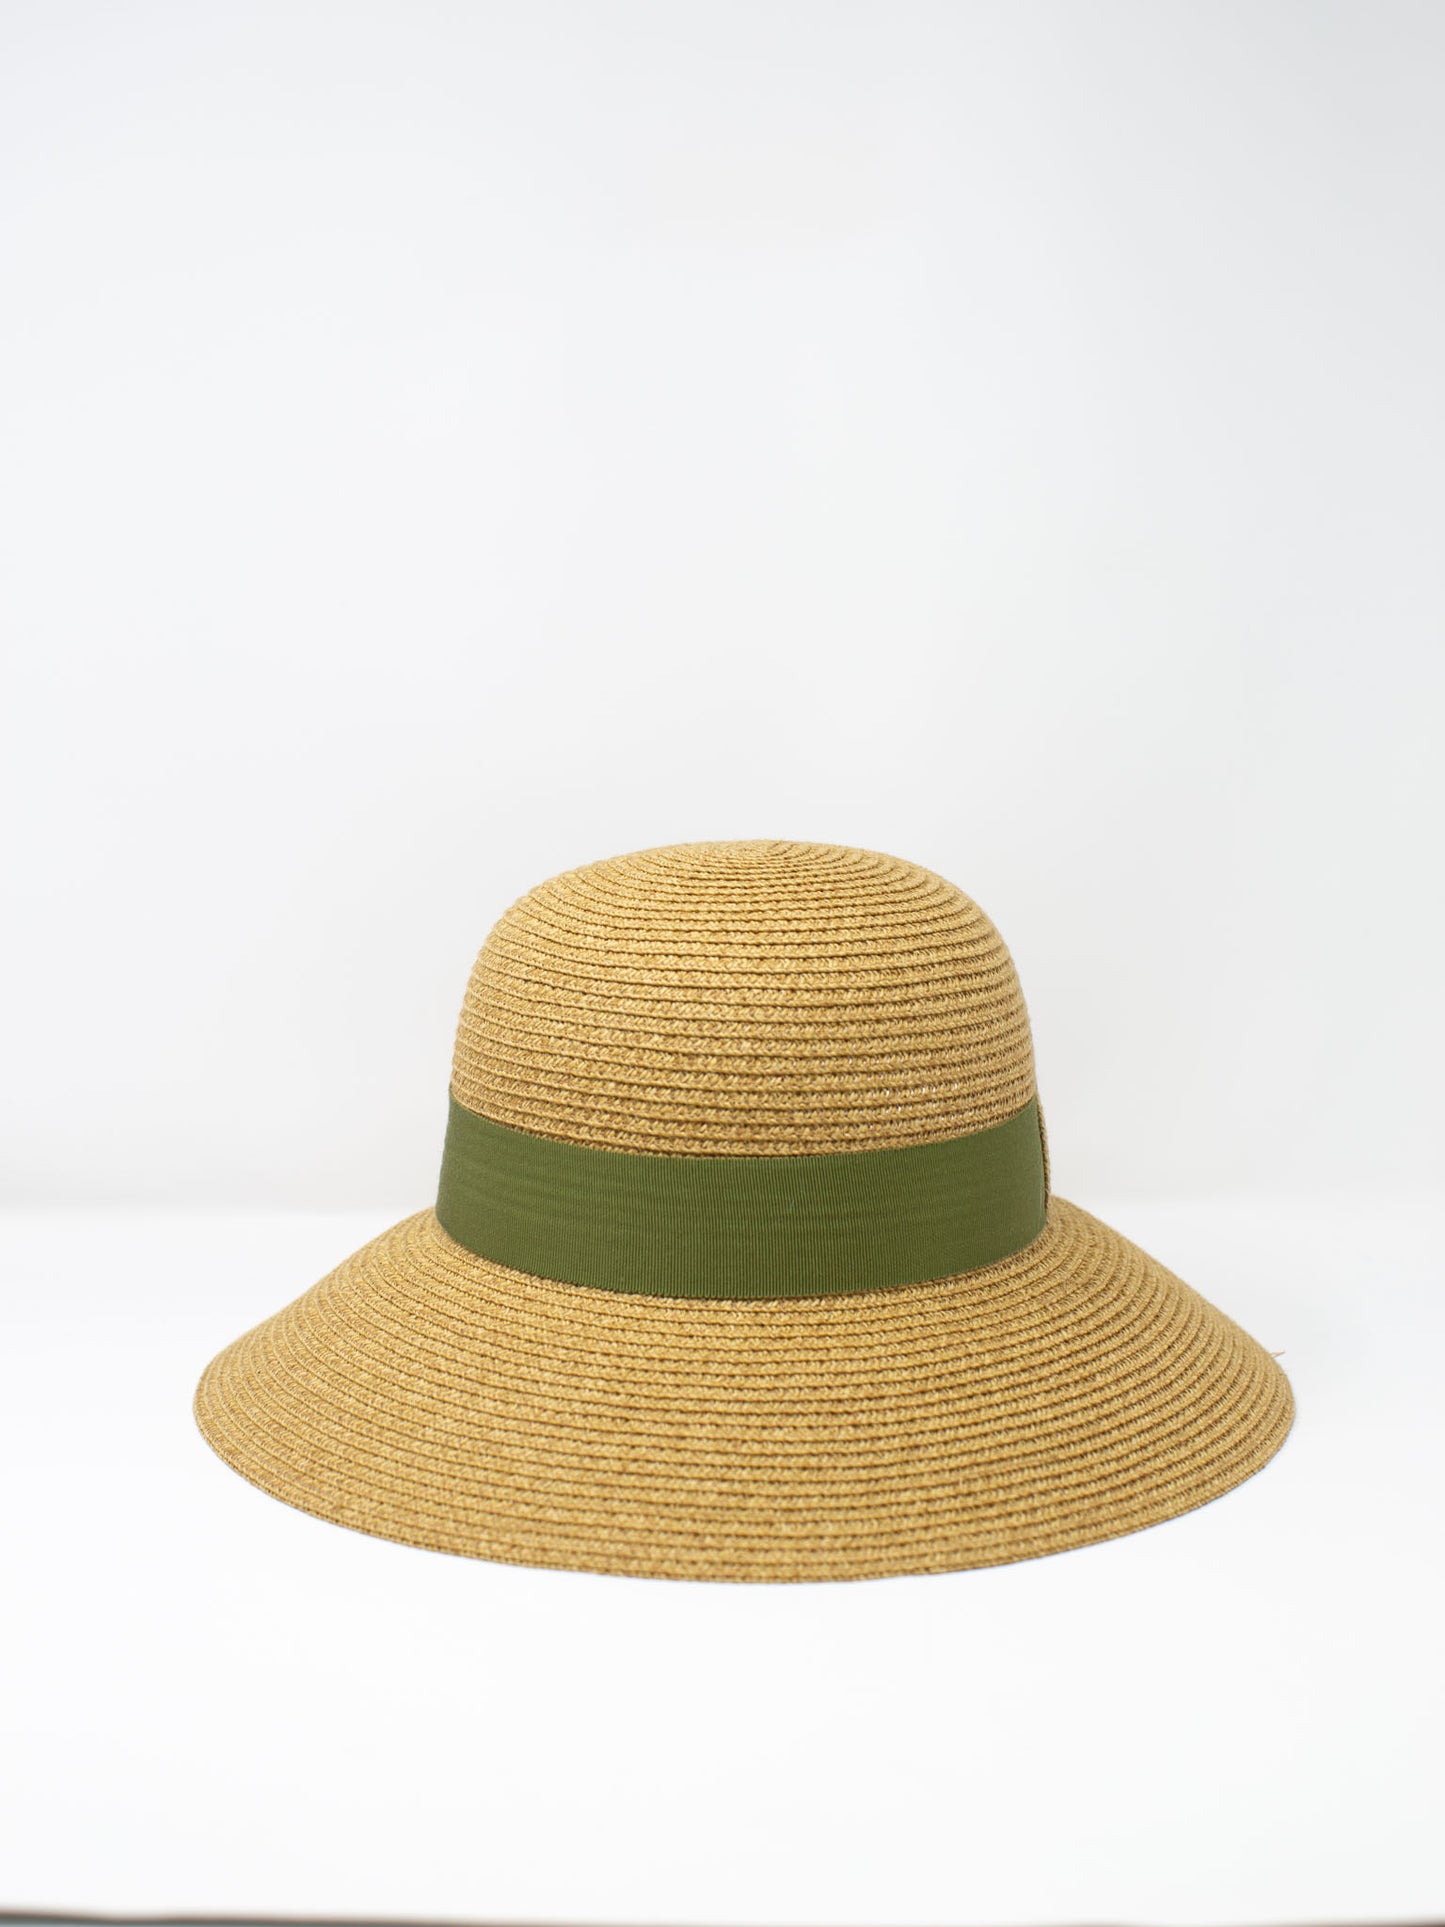 Toucan Collection Cloche Sun Hat (Sage Green)